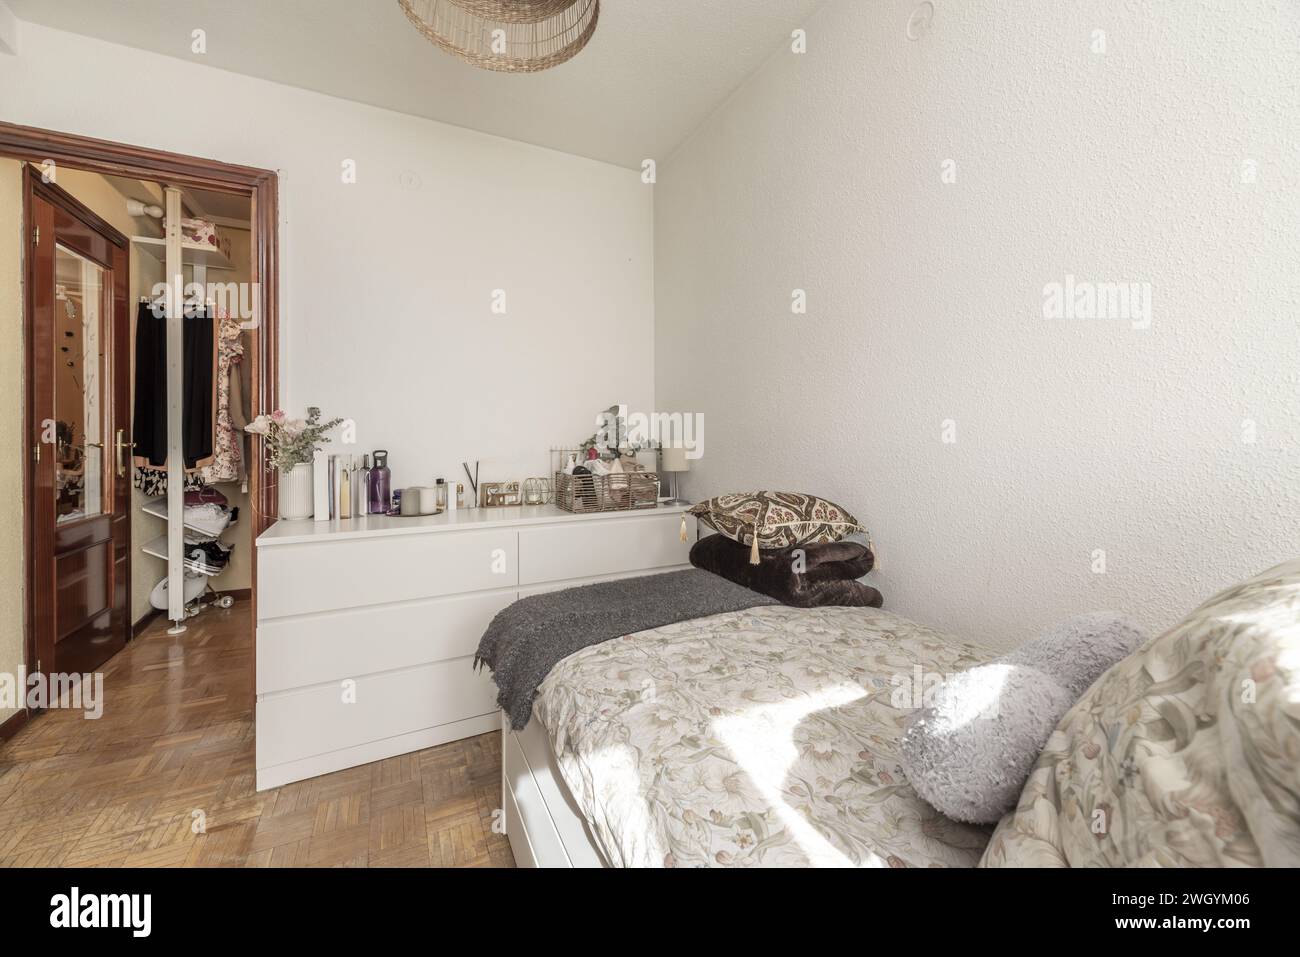 A youth bedroom with a single bed, aluminum radiator, clothes hanging on a shelf outside the room and a white dresser with many drawers Stock Photo